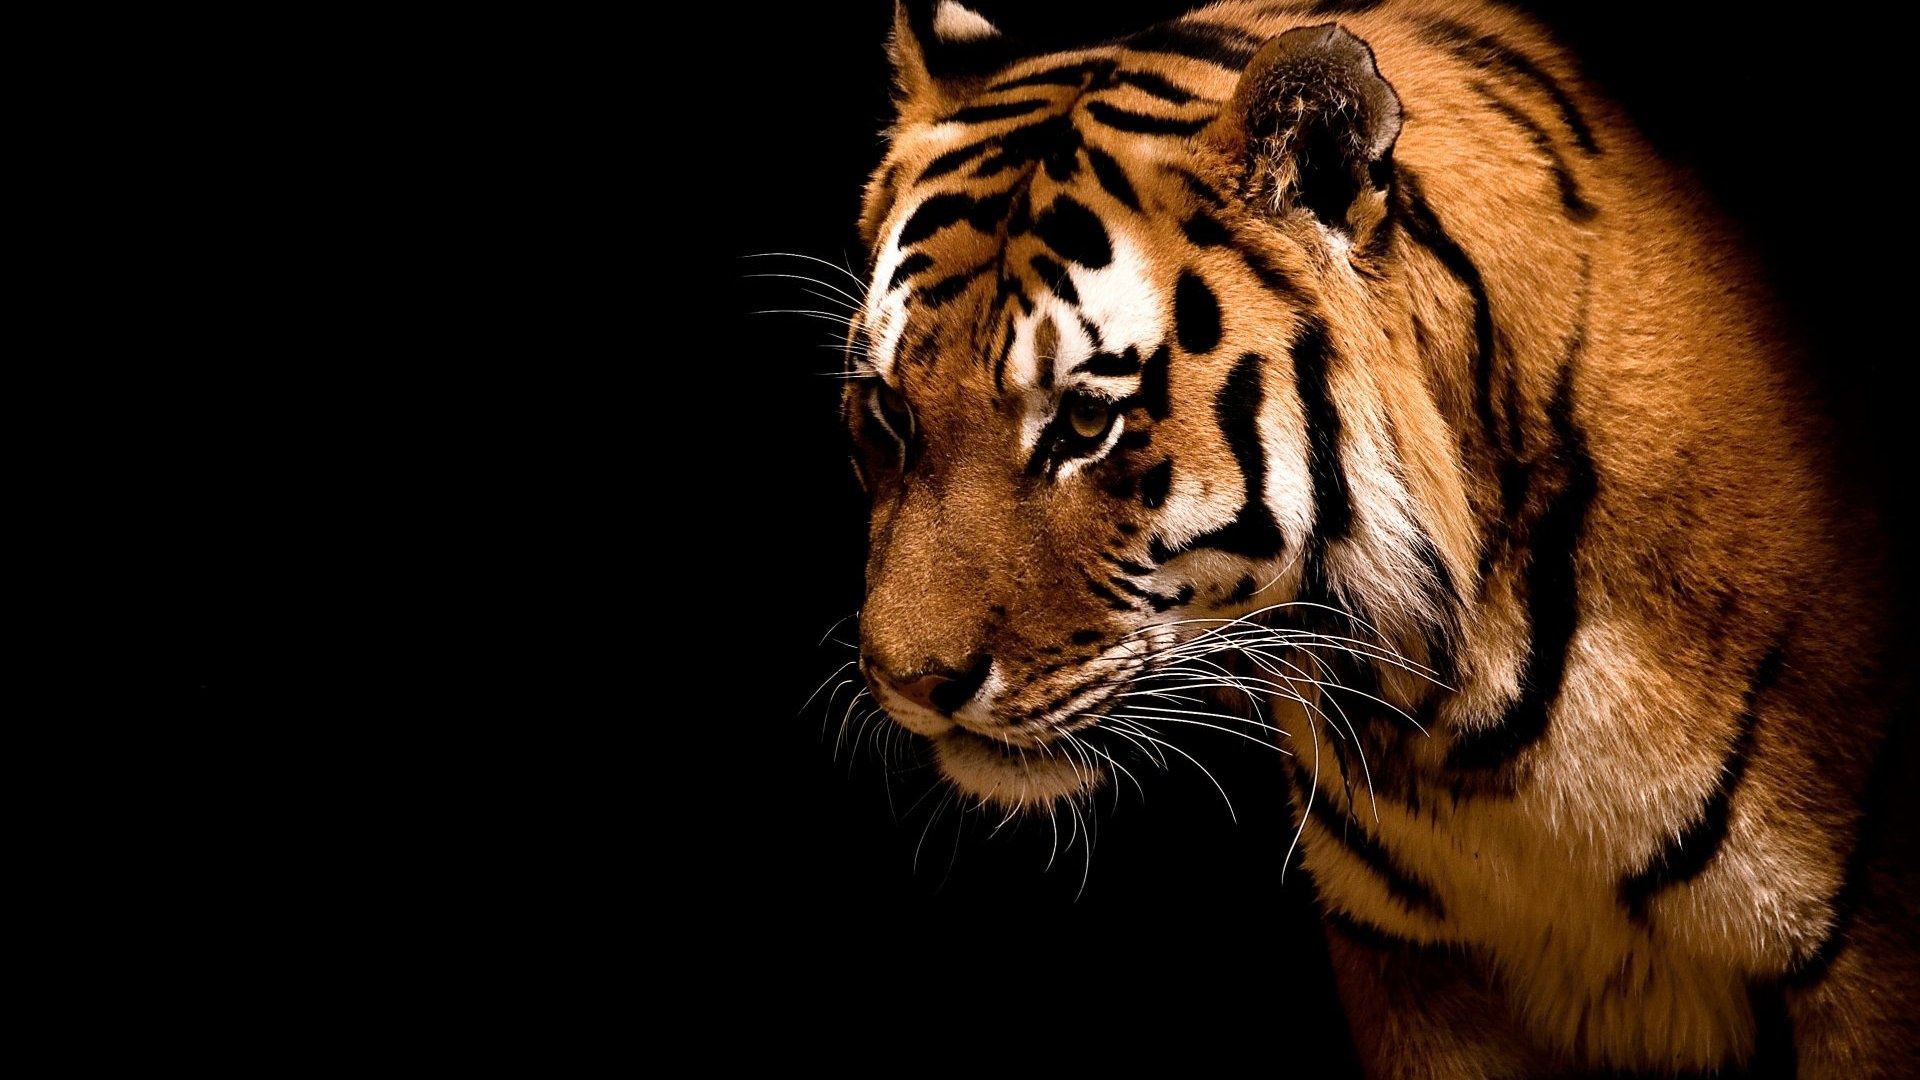 1064 Tiger HD Wallpapers Backgrounds - Wallpaper Abyss